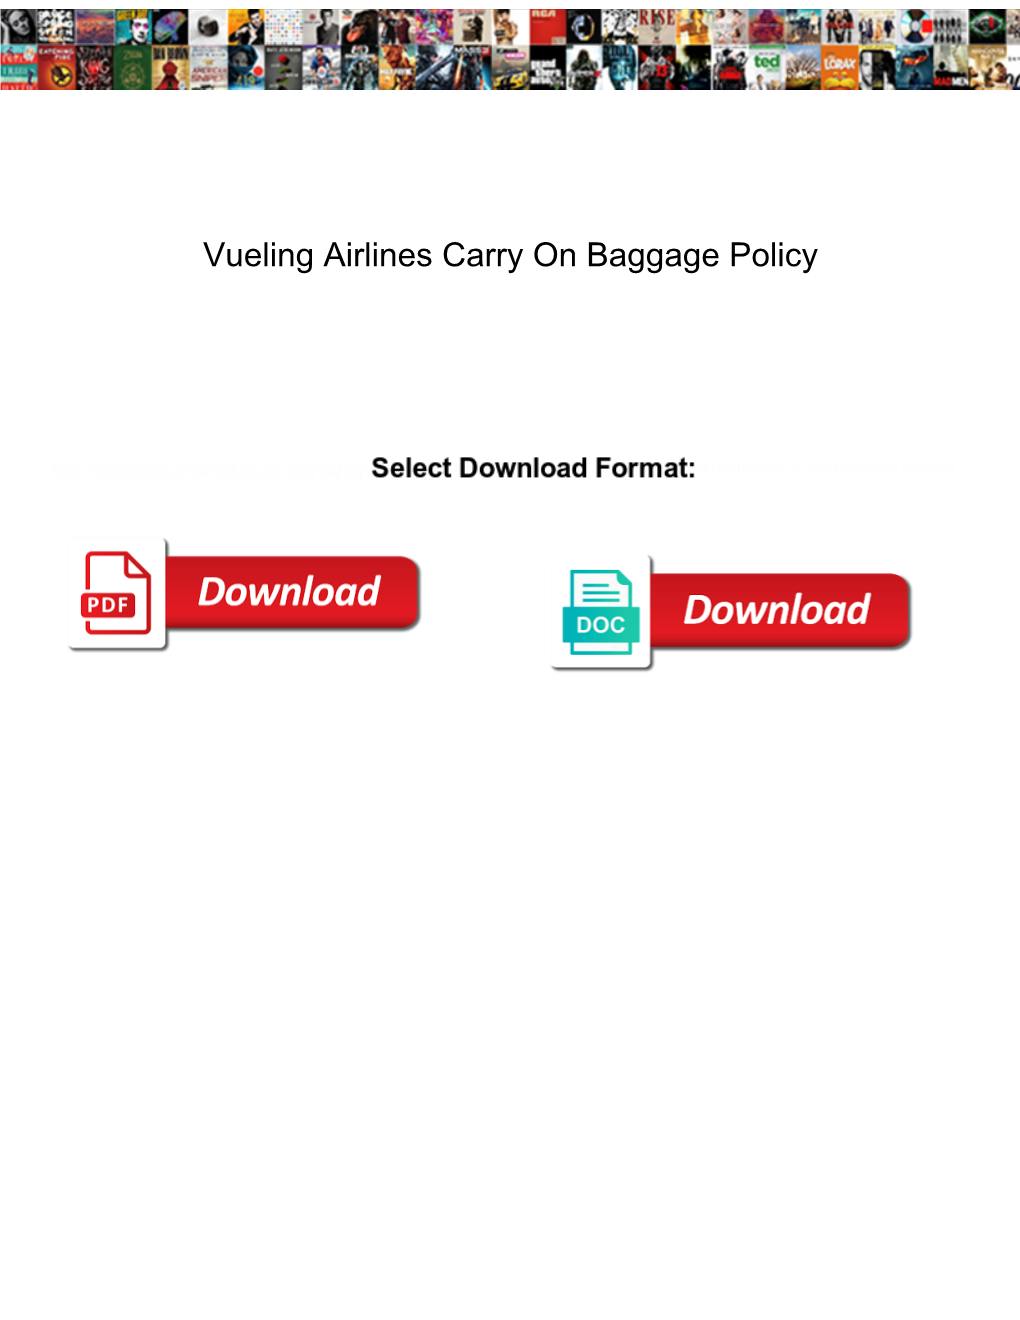 Vueling Airlines Carry on Baggage Policy